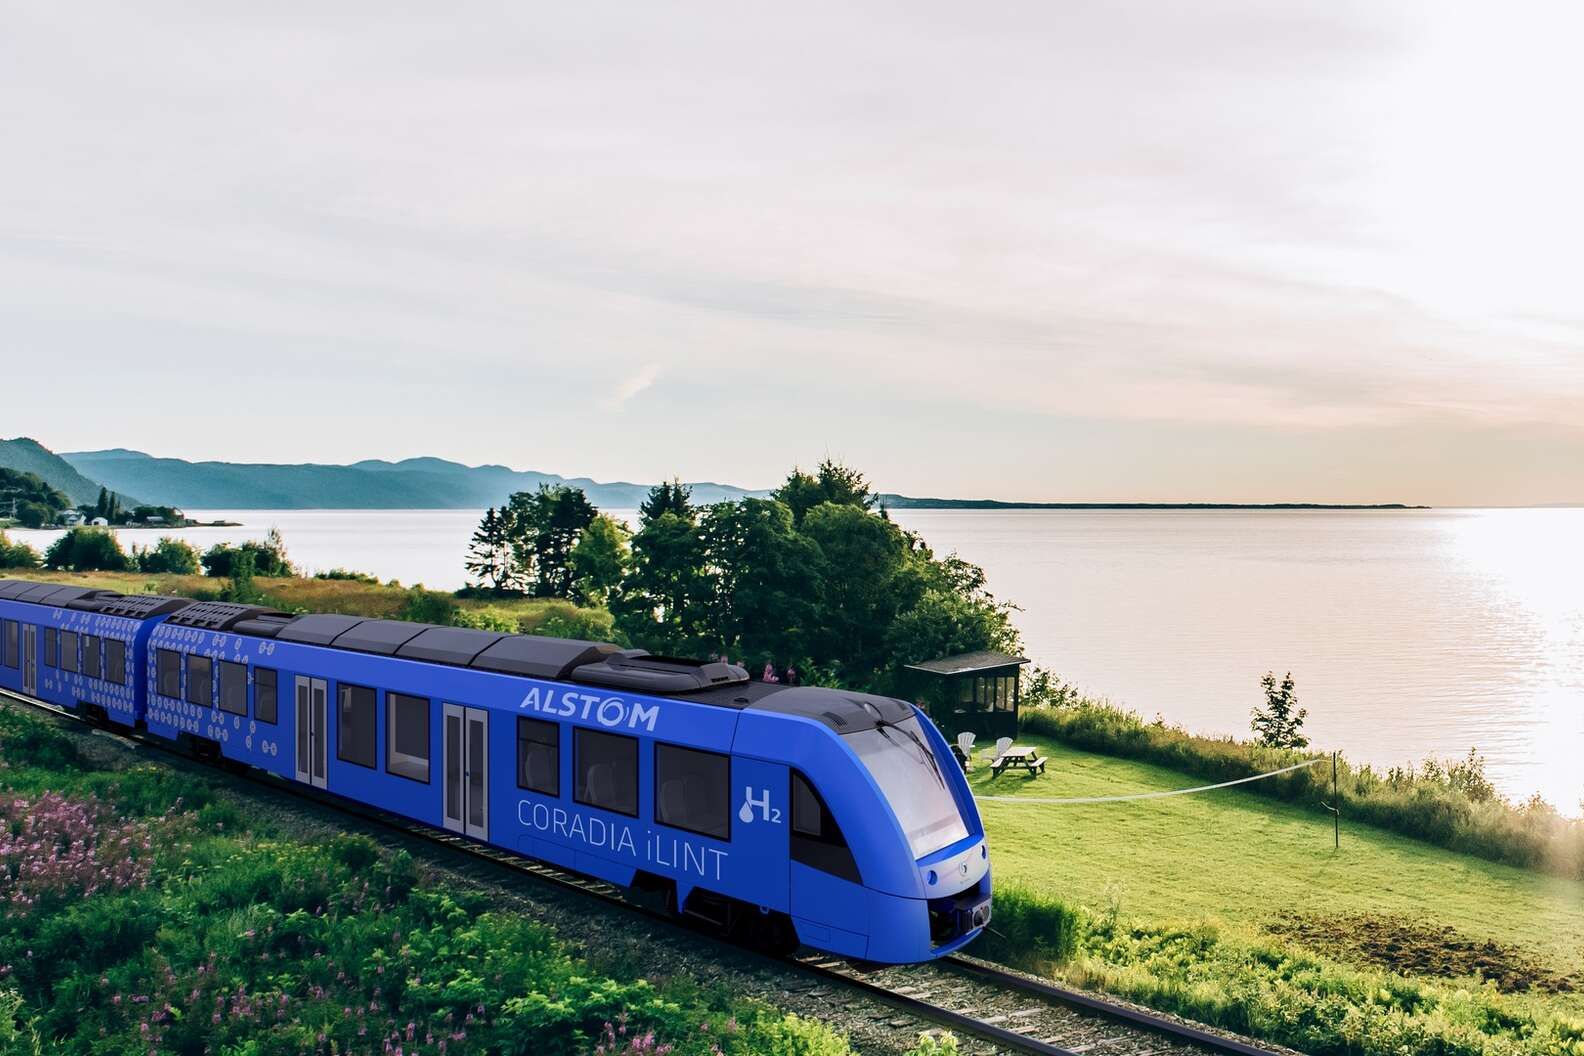 North America's First Hydrogen-Powered Train Will Debut This Summer